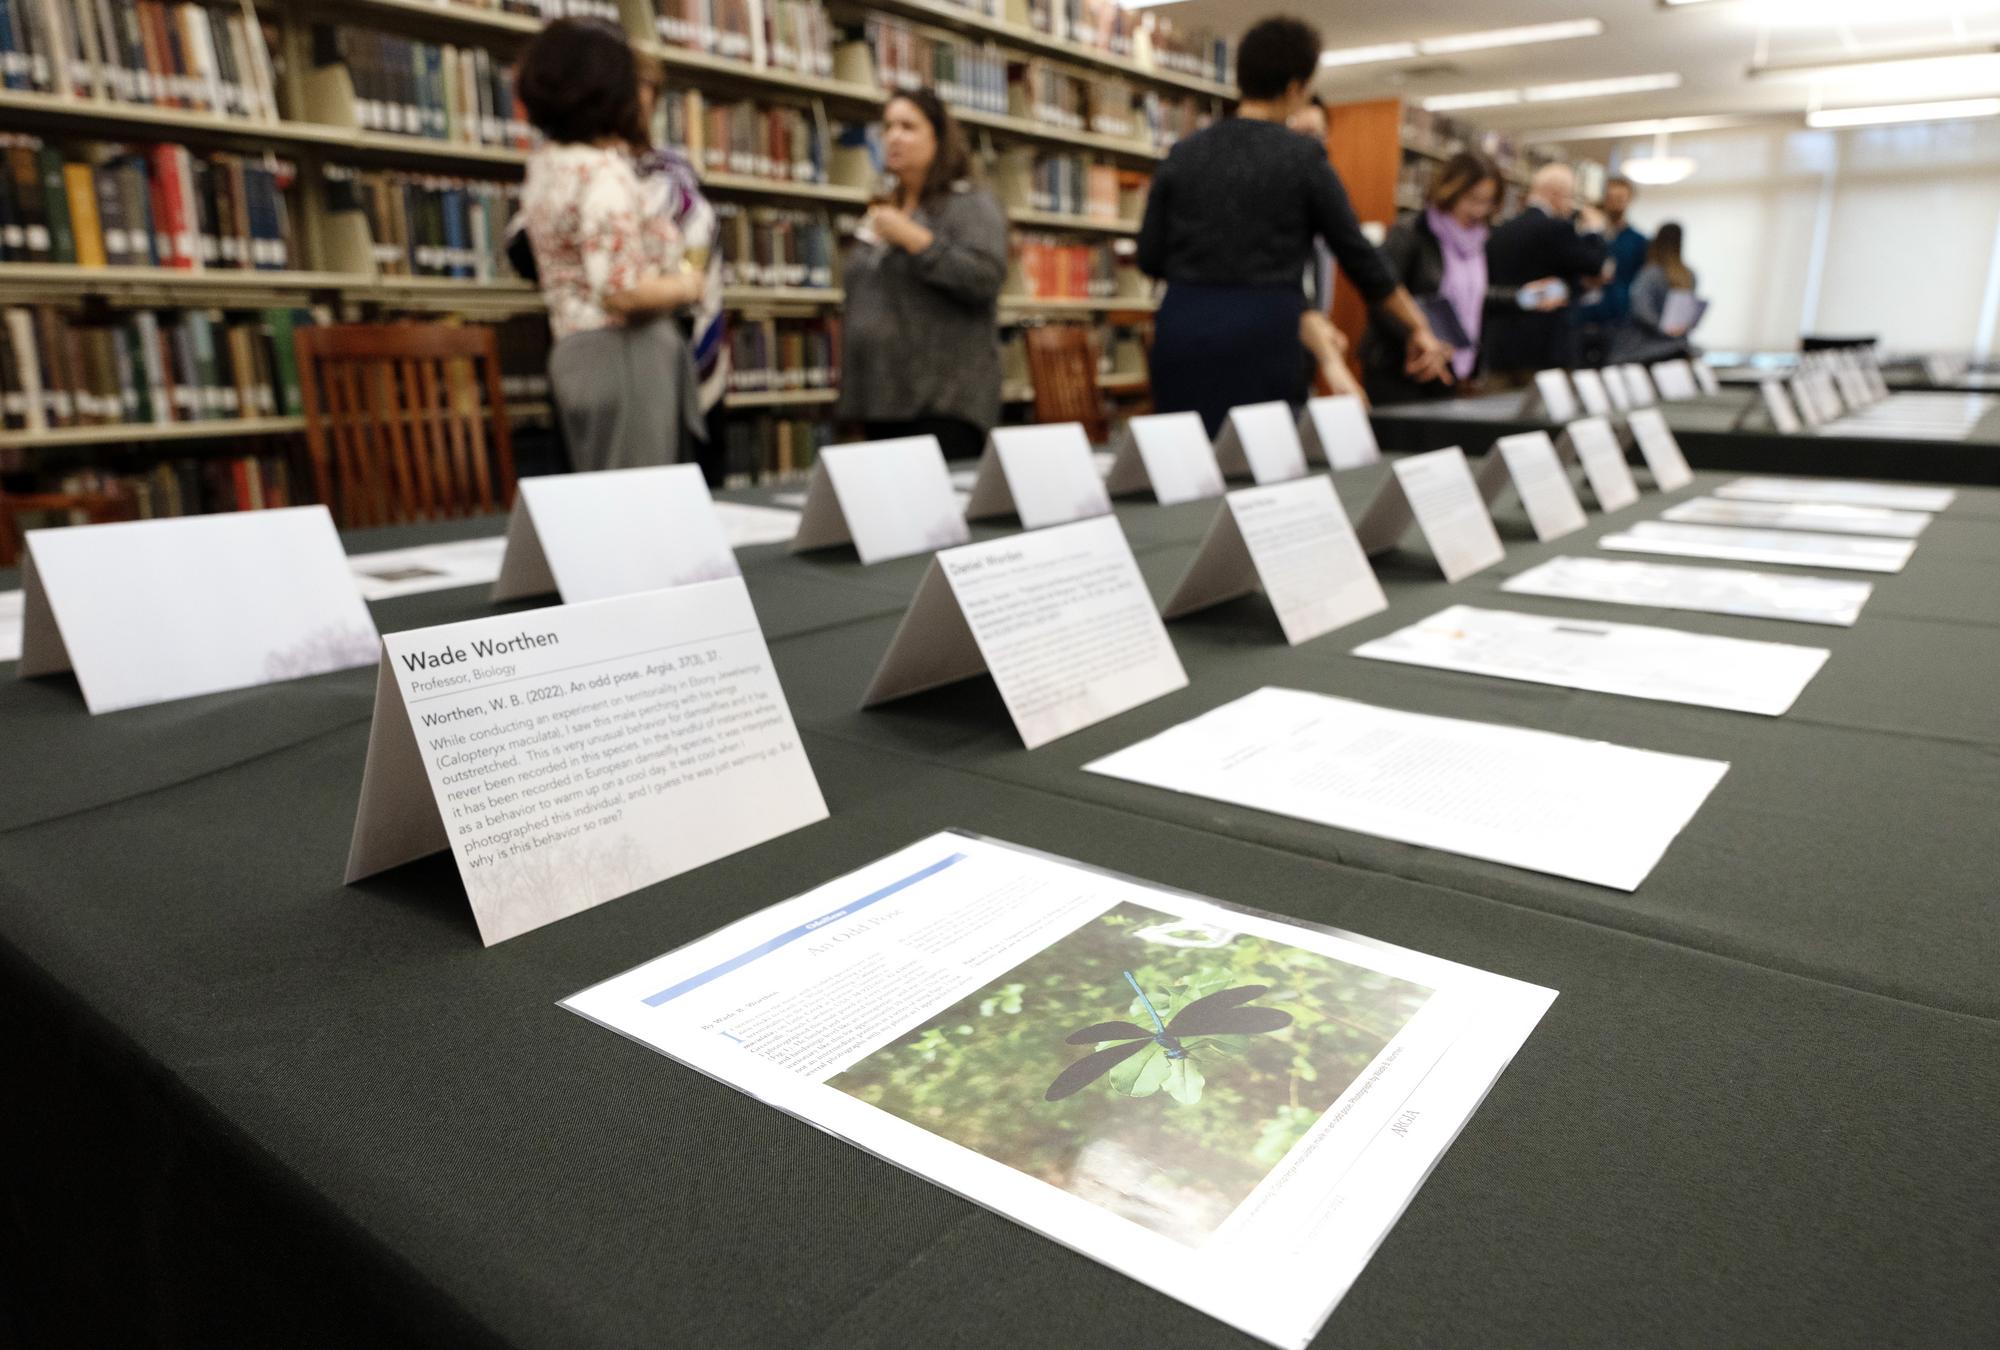 Scholarly and creative achievements were on display during the Faculty Scholarship Reception at the James B. Duke Library on Feb. 10.